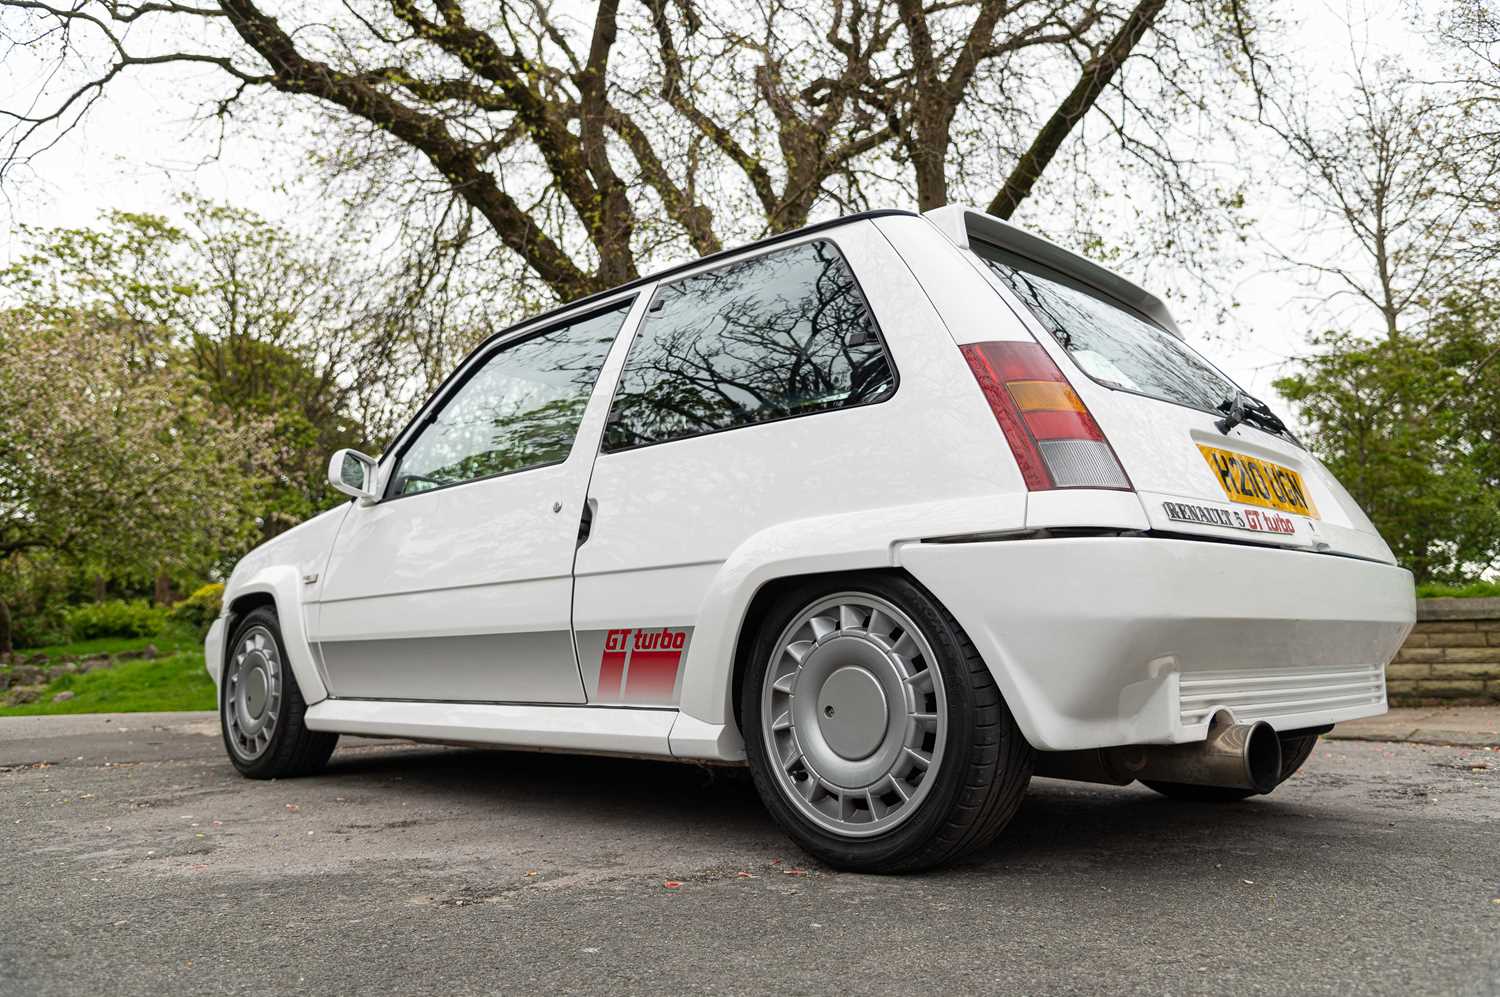 1990 Renault 5 GT Turbo - Image 11 of 79